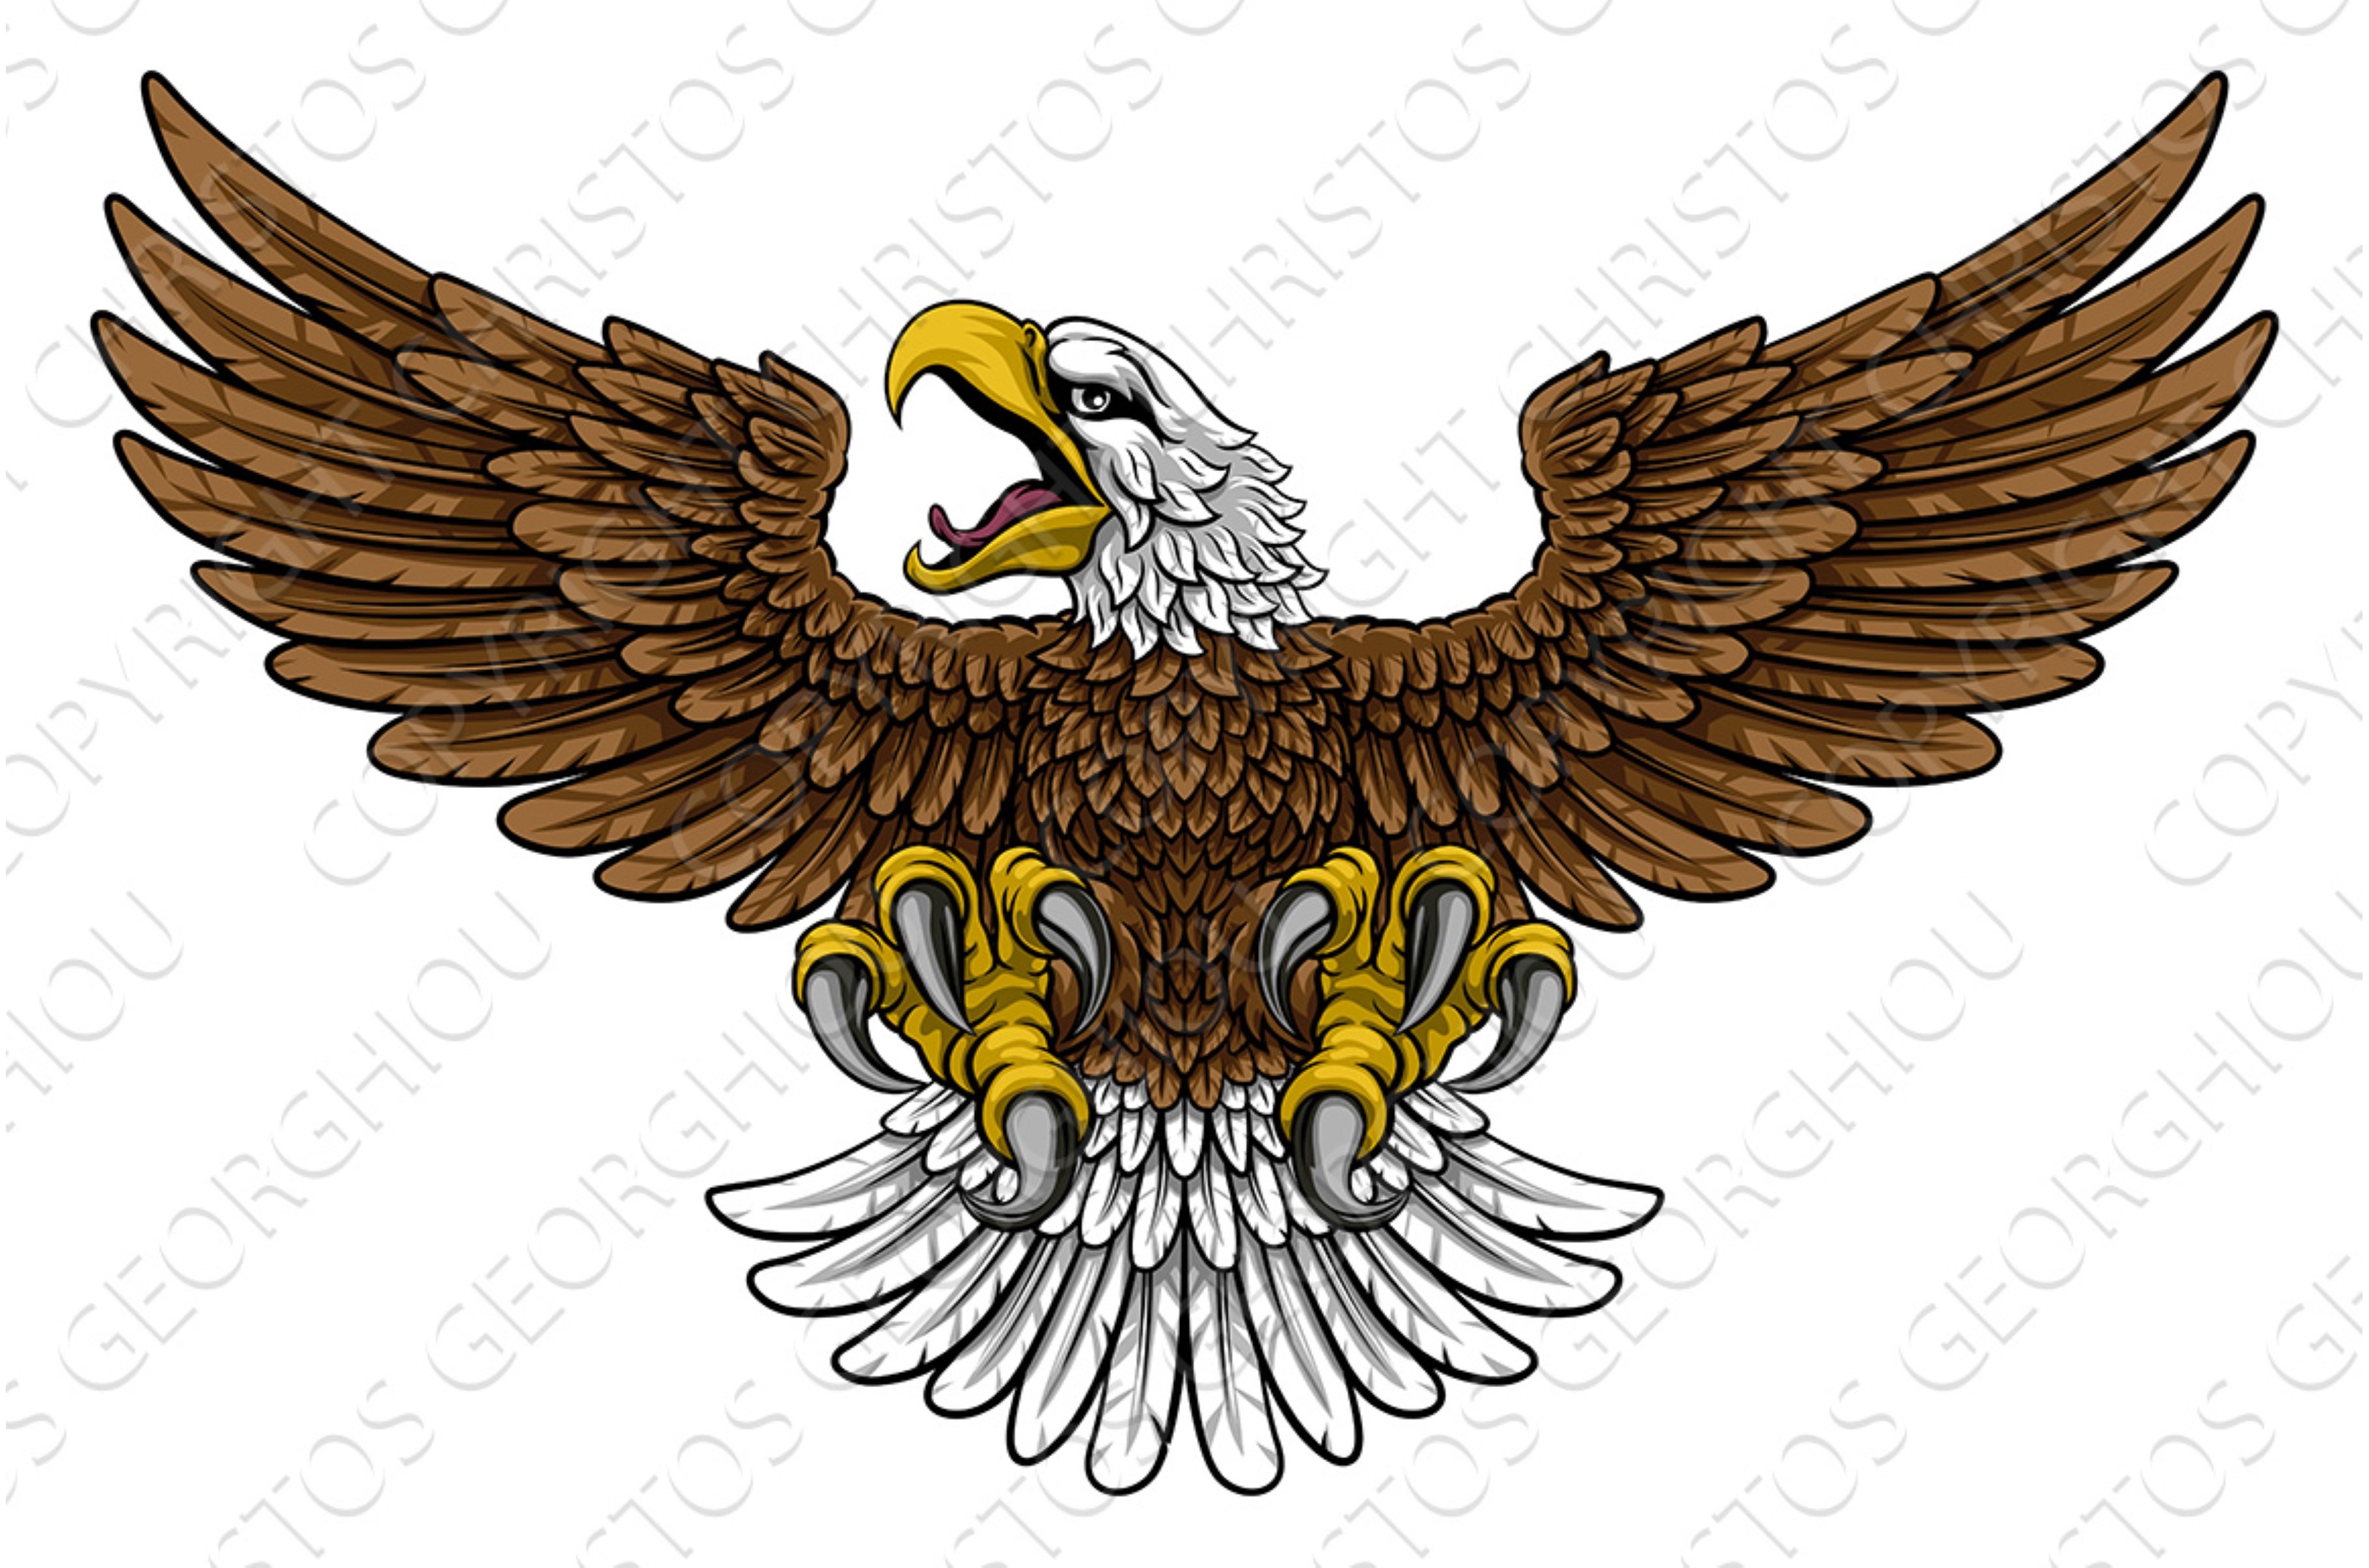 Bald Eagle Hawk Flying Wings Spread cover image.